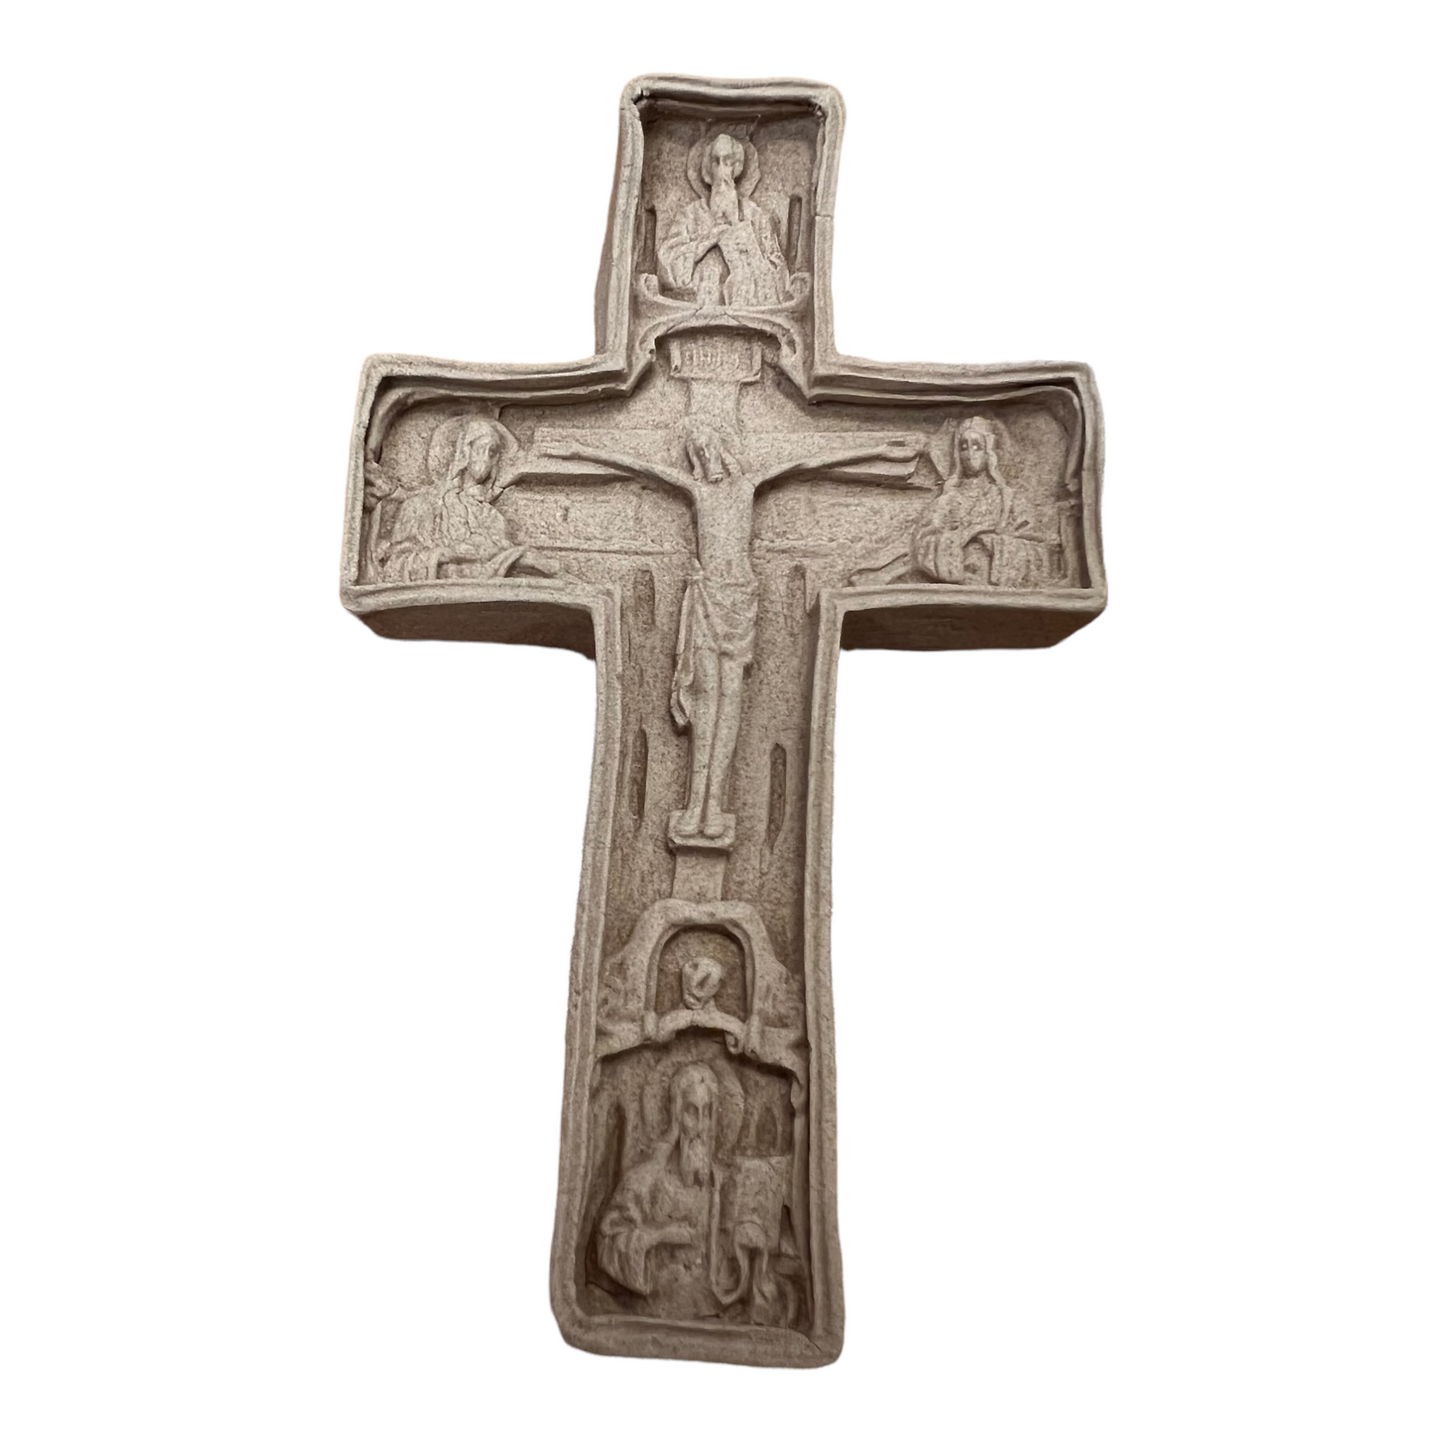 Carved Cross with Jesus,  Flexible moulding IFW 2393, embellishment